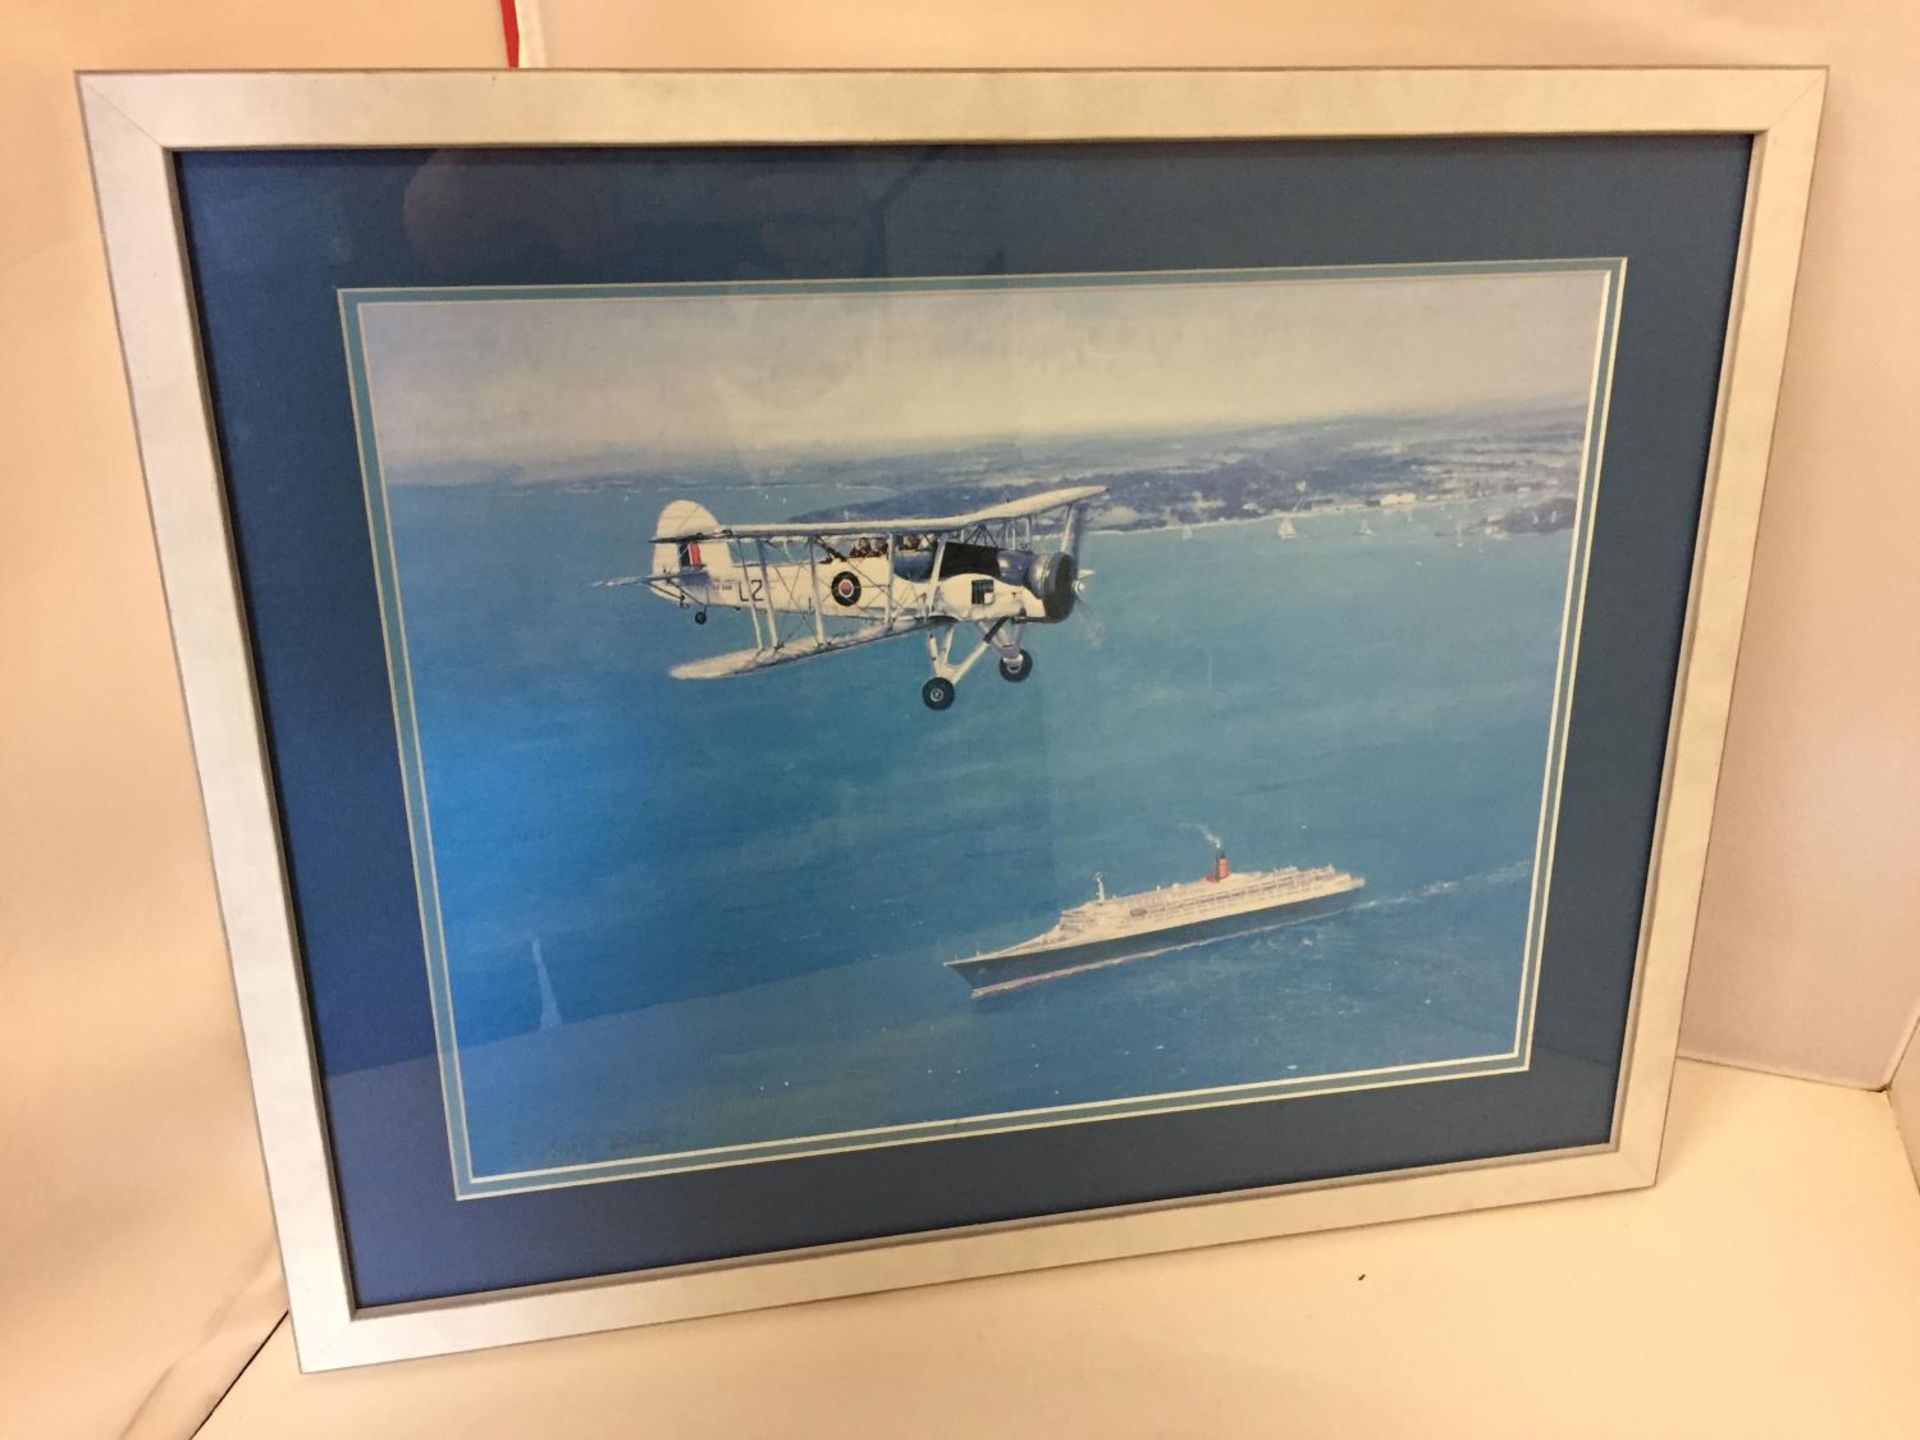 A FRAMED COLOURED PICTURE OF A SWORDFISH PLANE FLYING OVER A CRUISE SHIP 30CM X 40CM